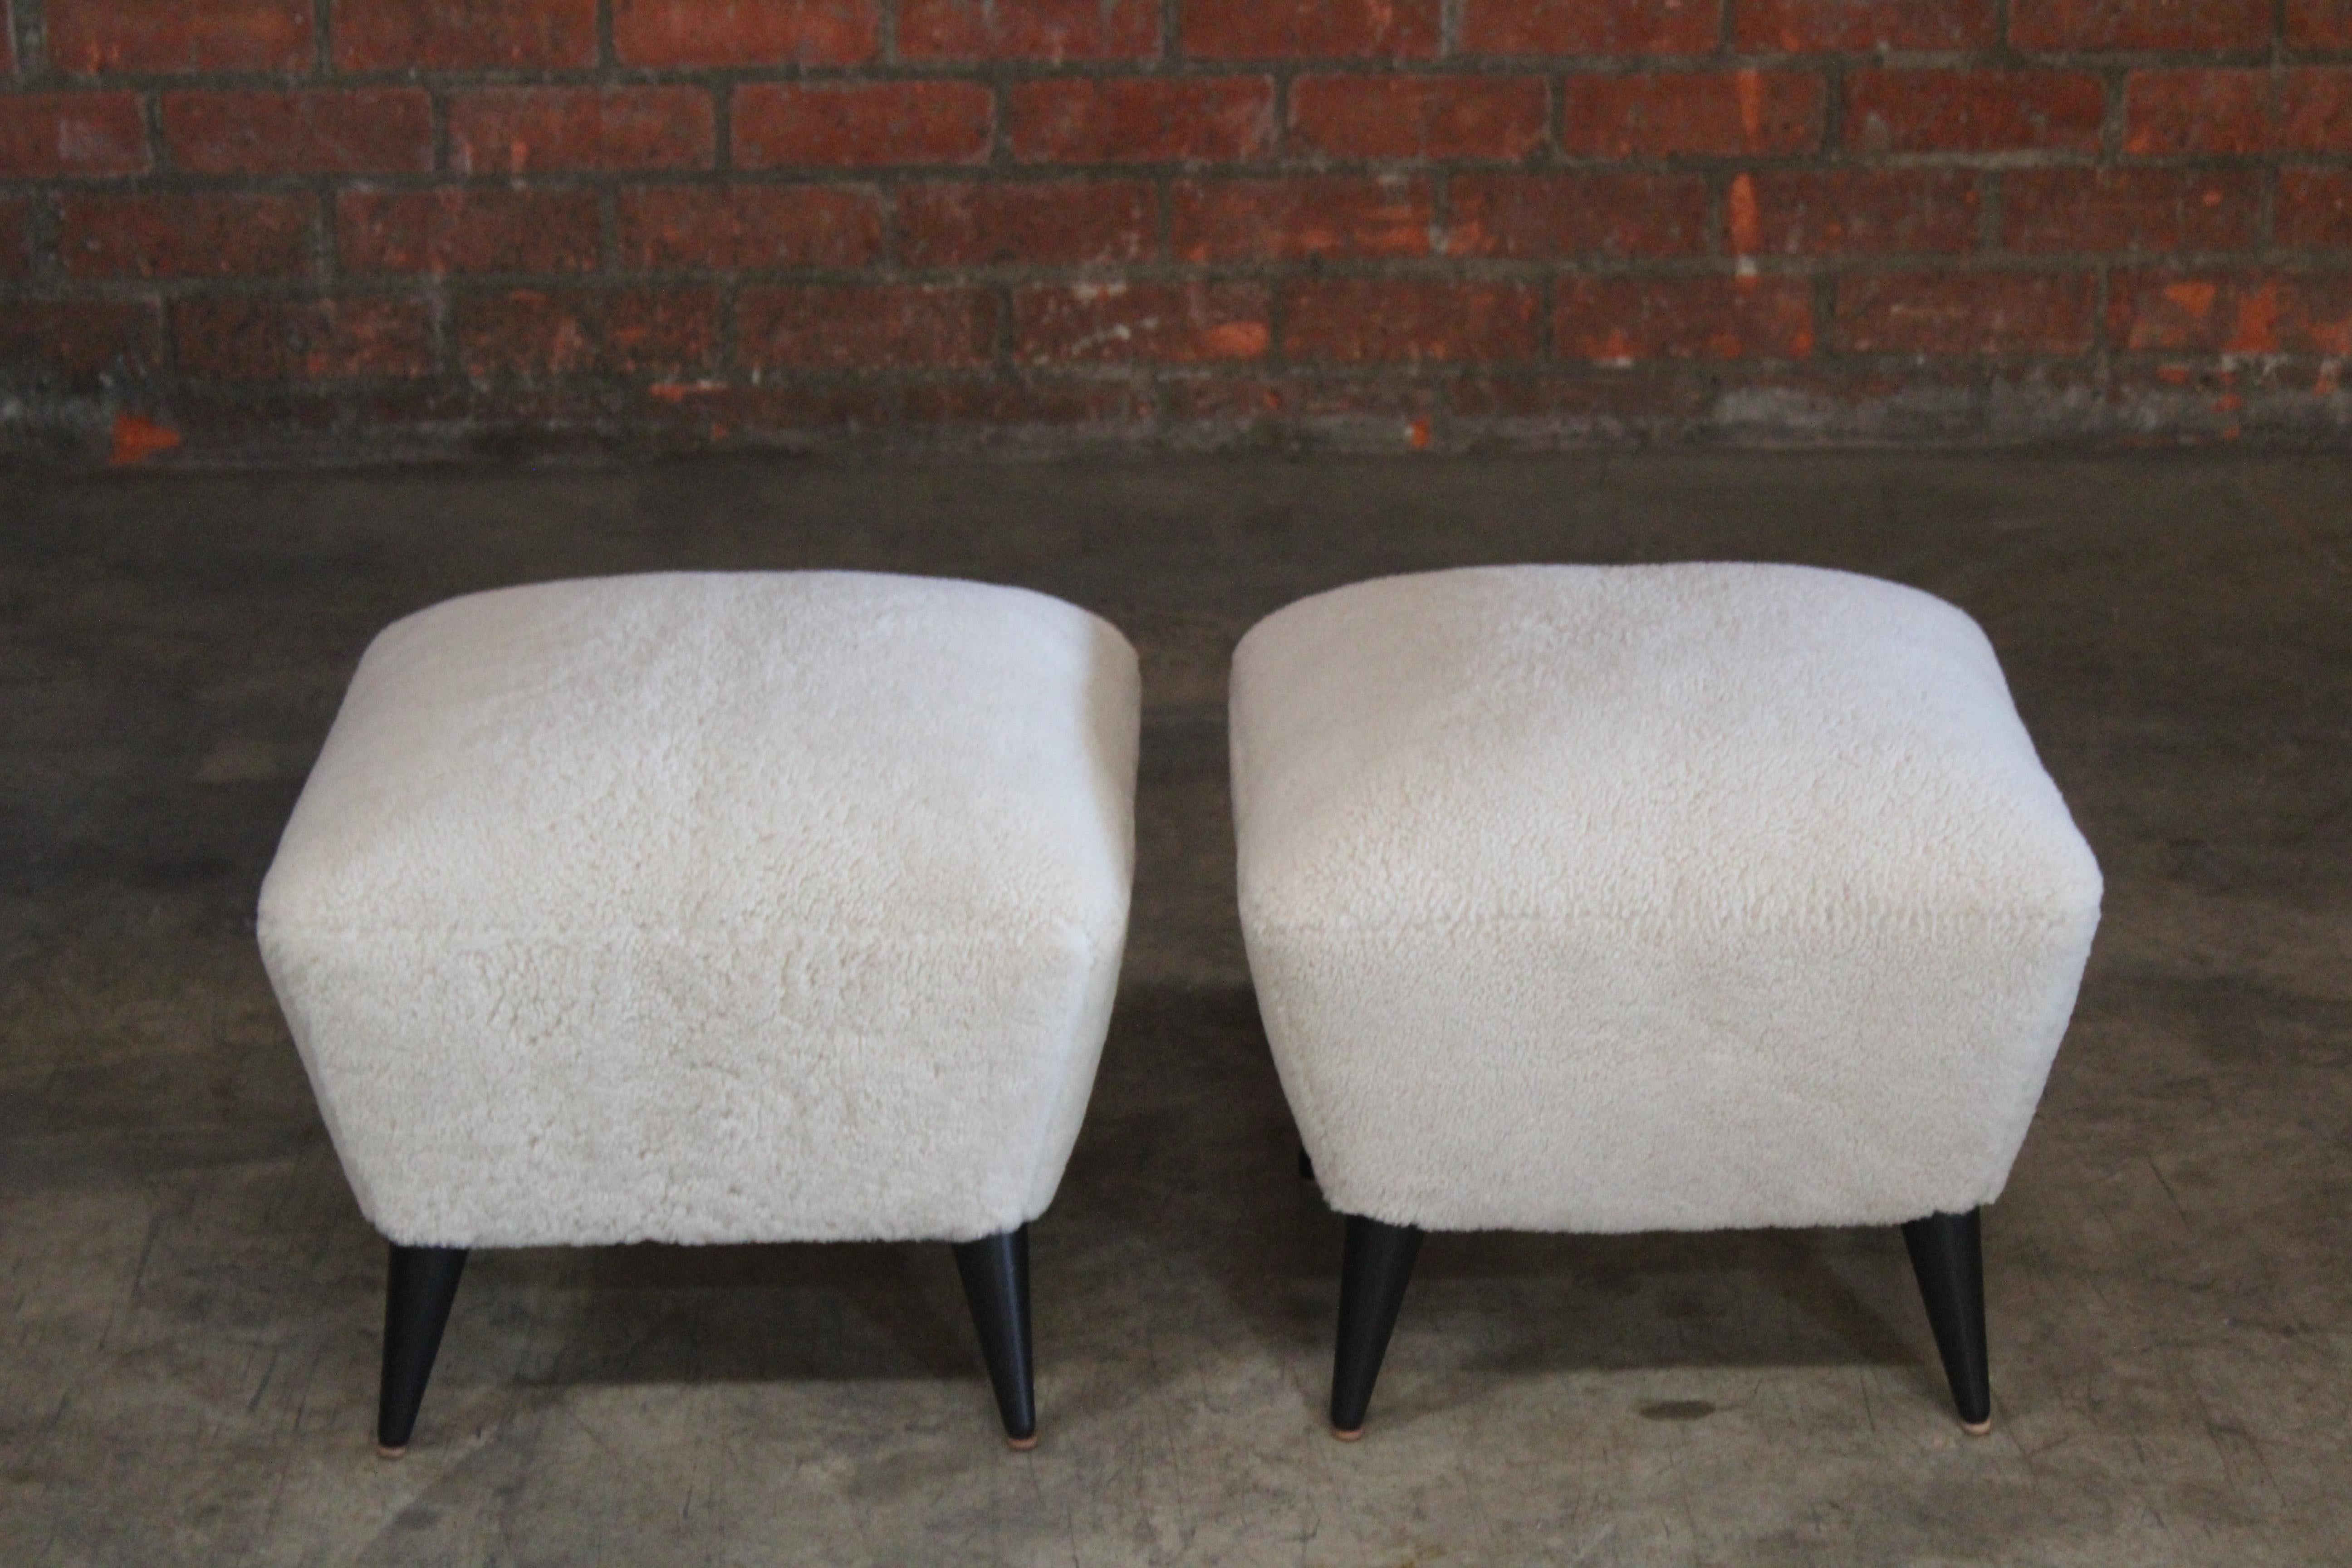 French Pair of 1950s Sheepskin Ottomans by Henri Cailon for Erton, France, 1956